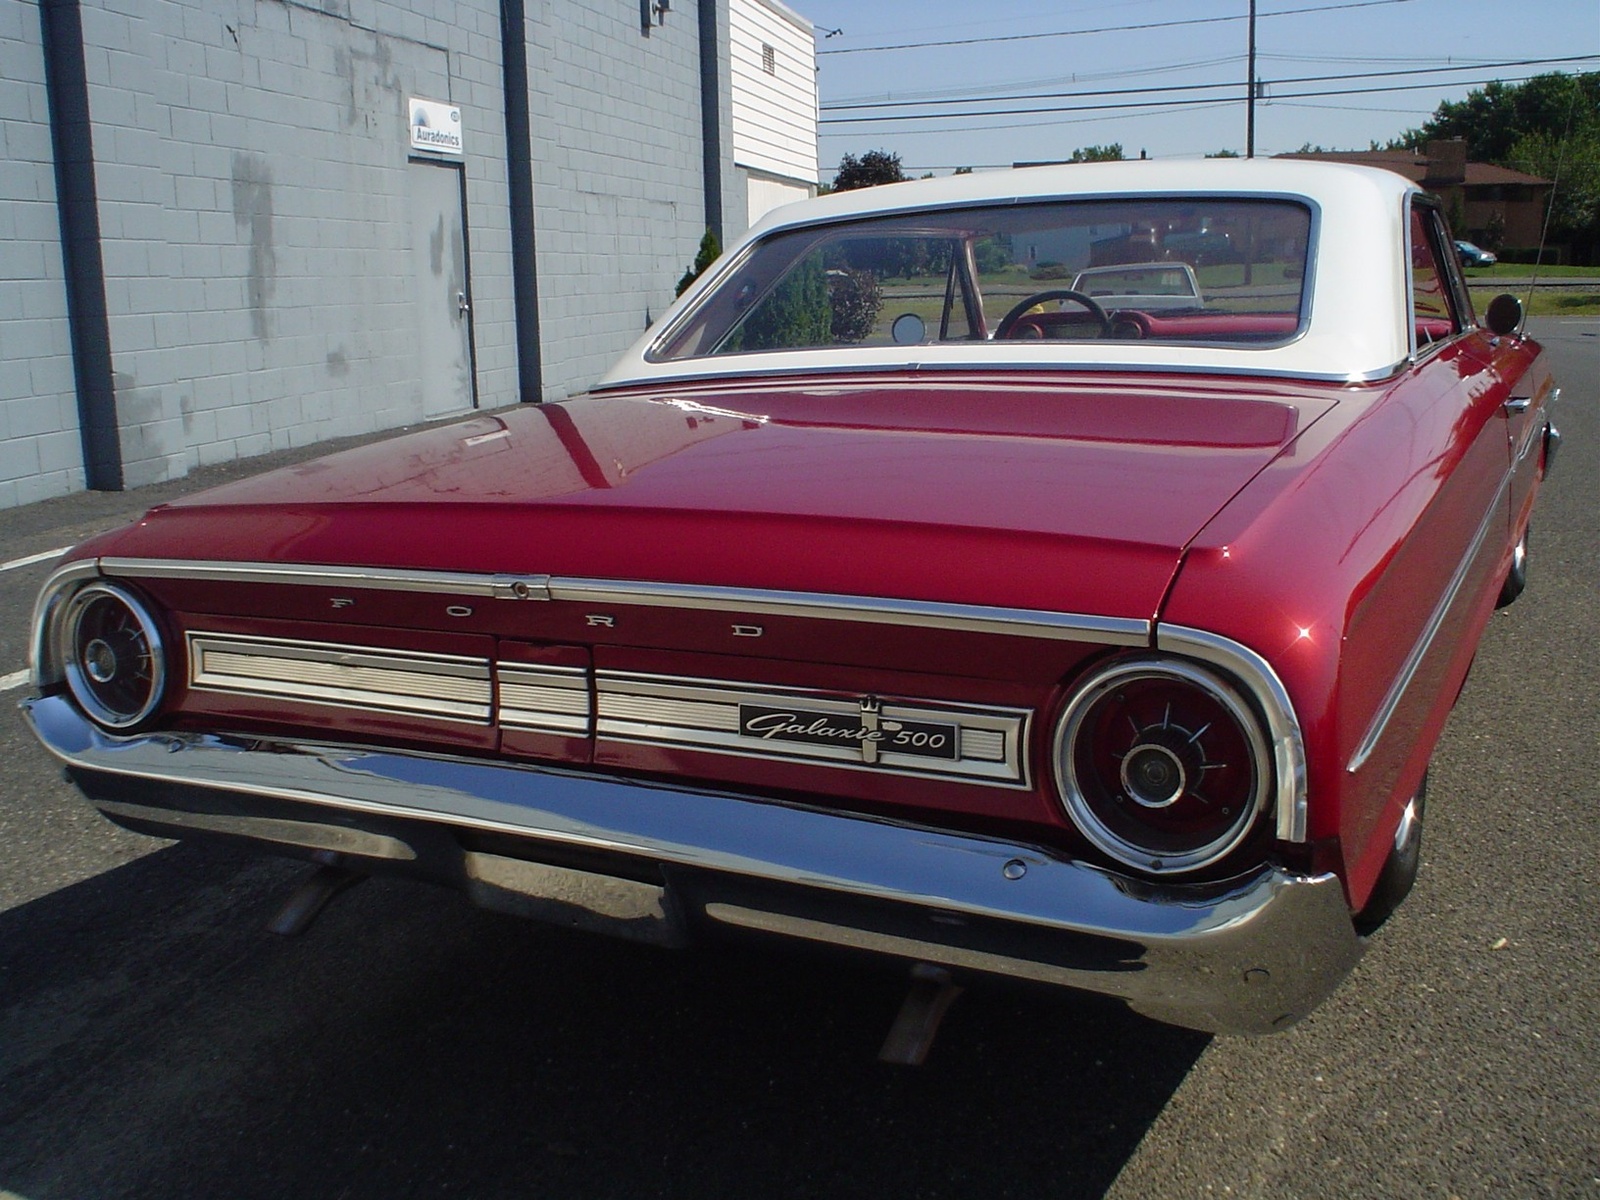 1964 Ford galixe